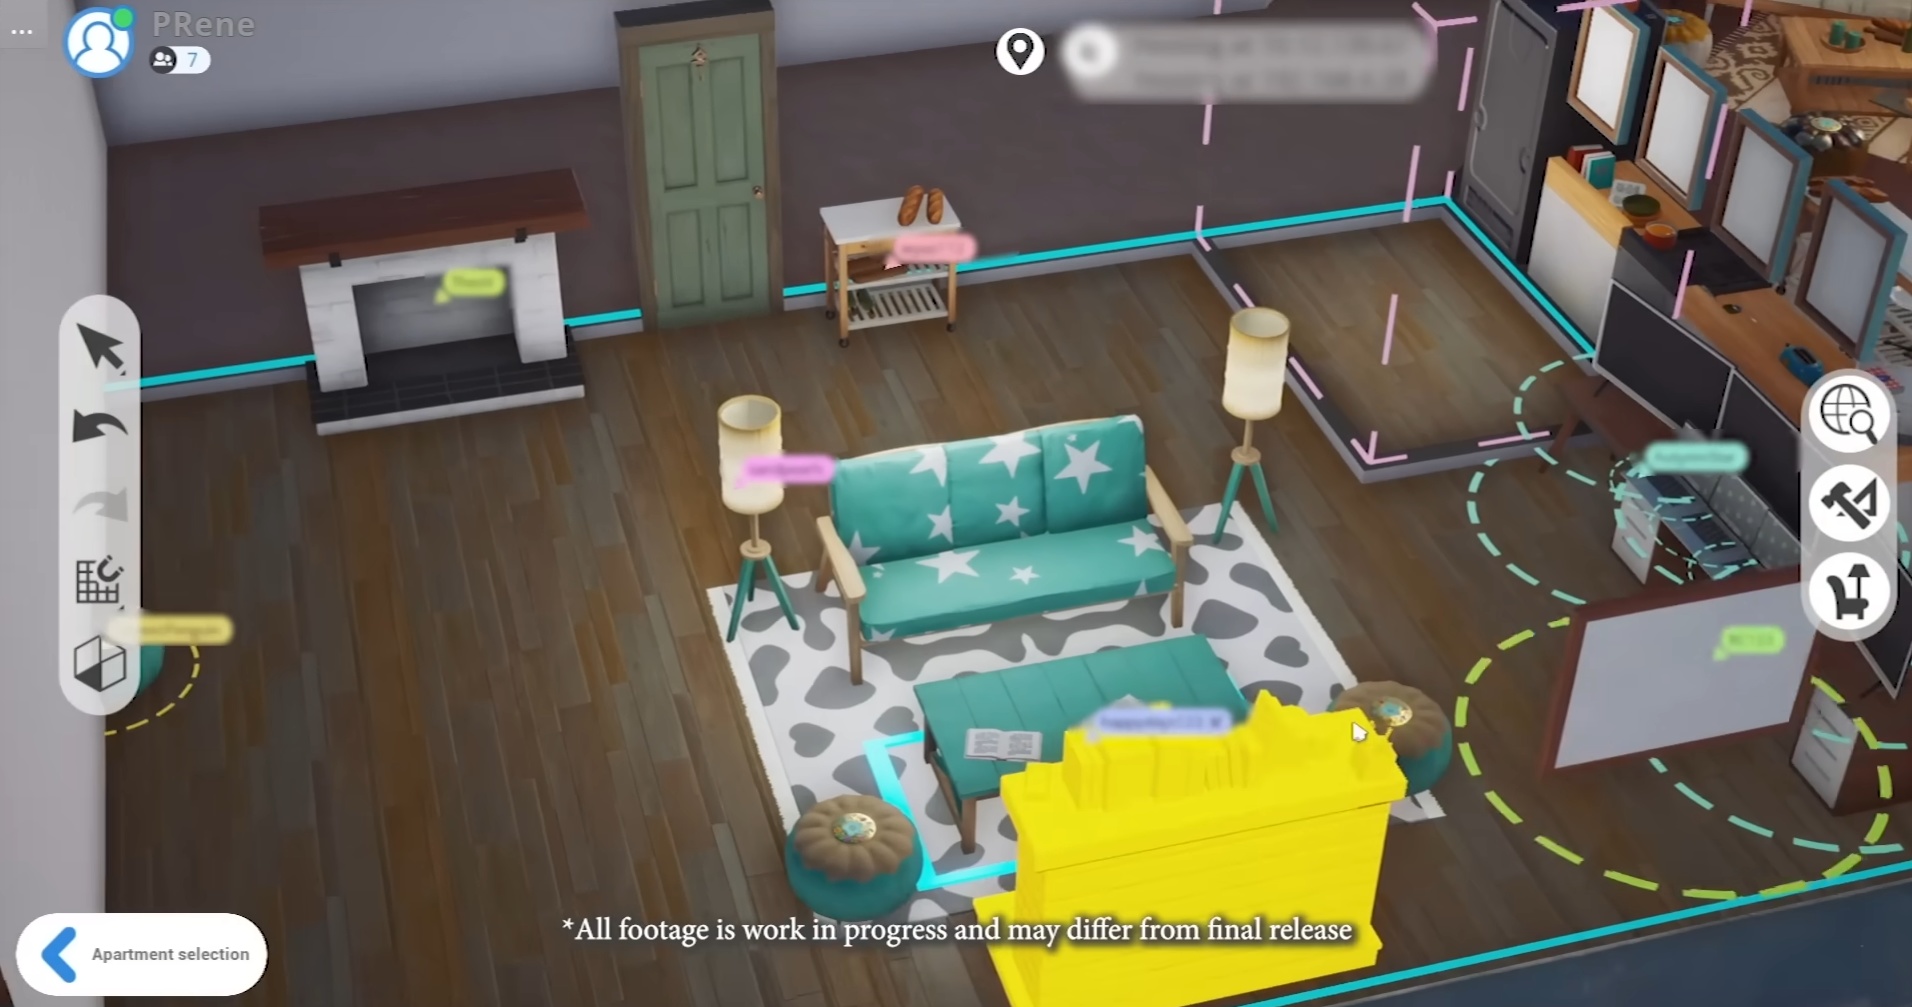 (Relationships and friendships have already broken down when decorating real flats. Whether it works better in The Sims 5 remains to be seen.)